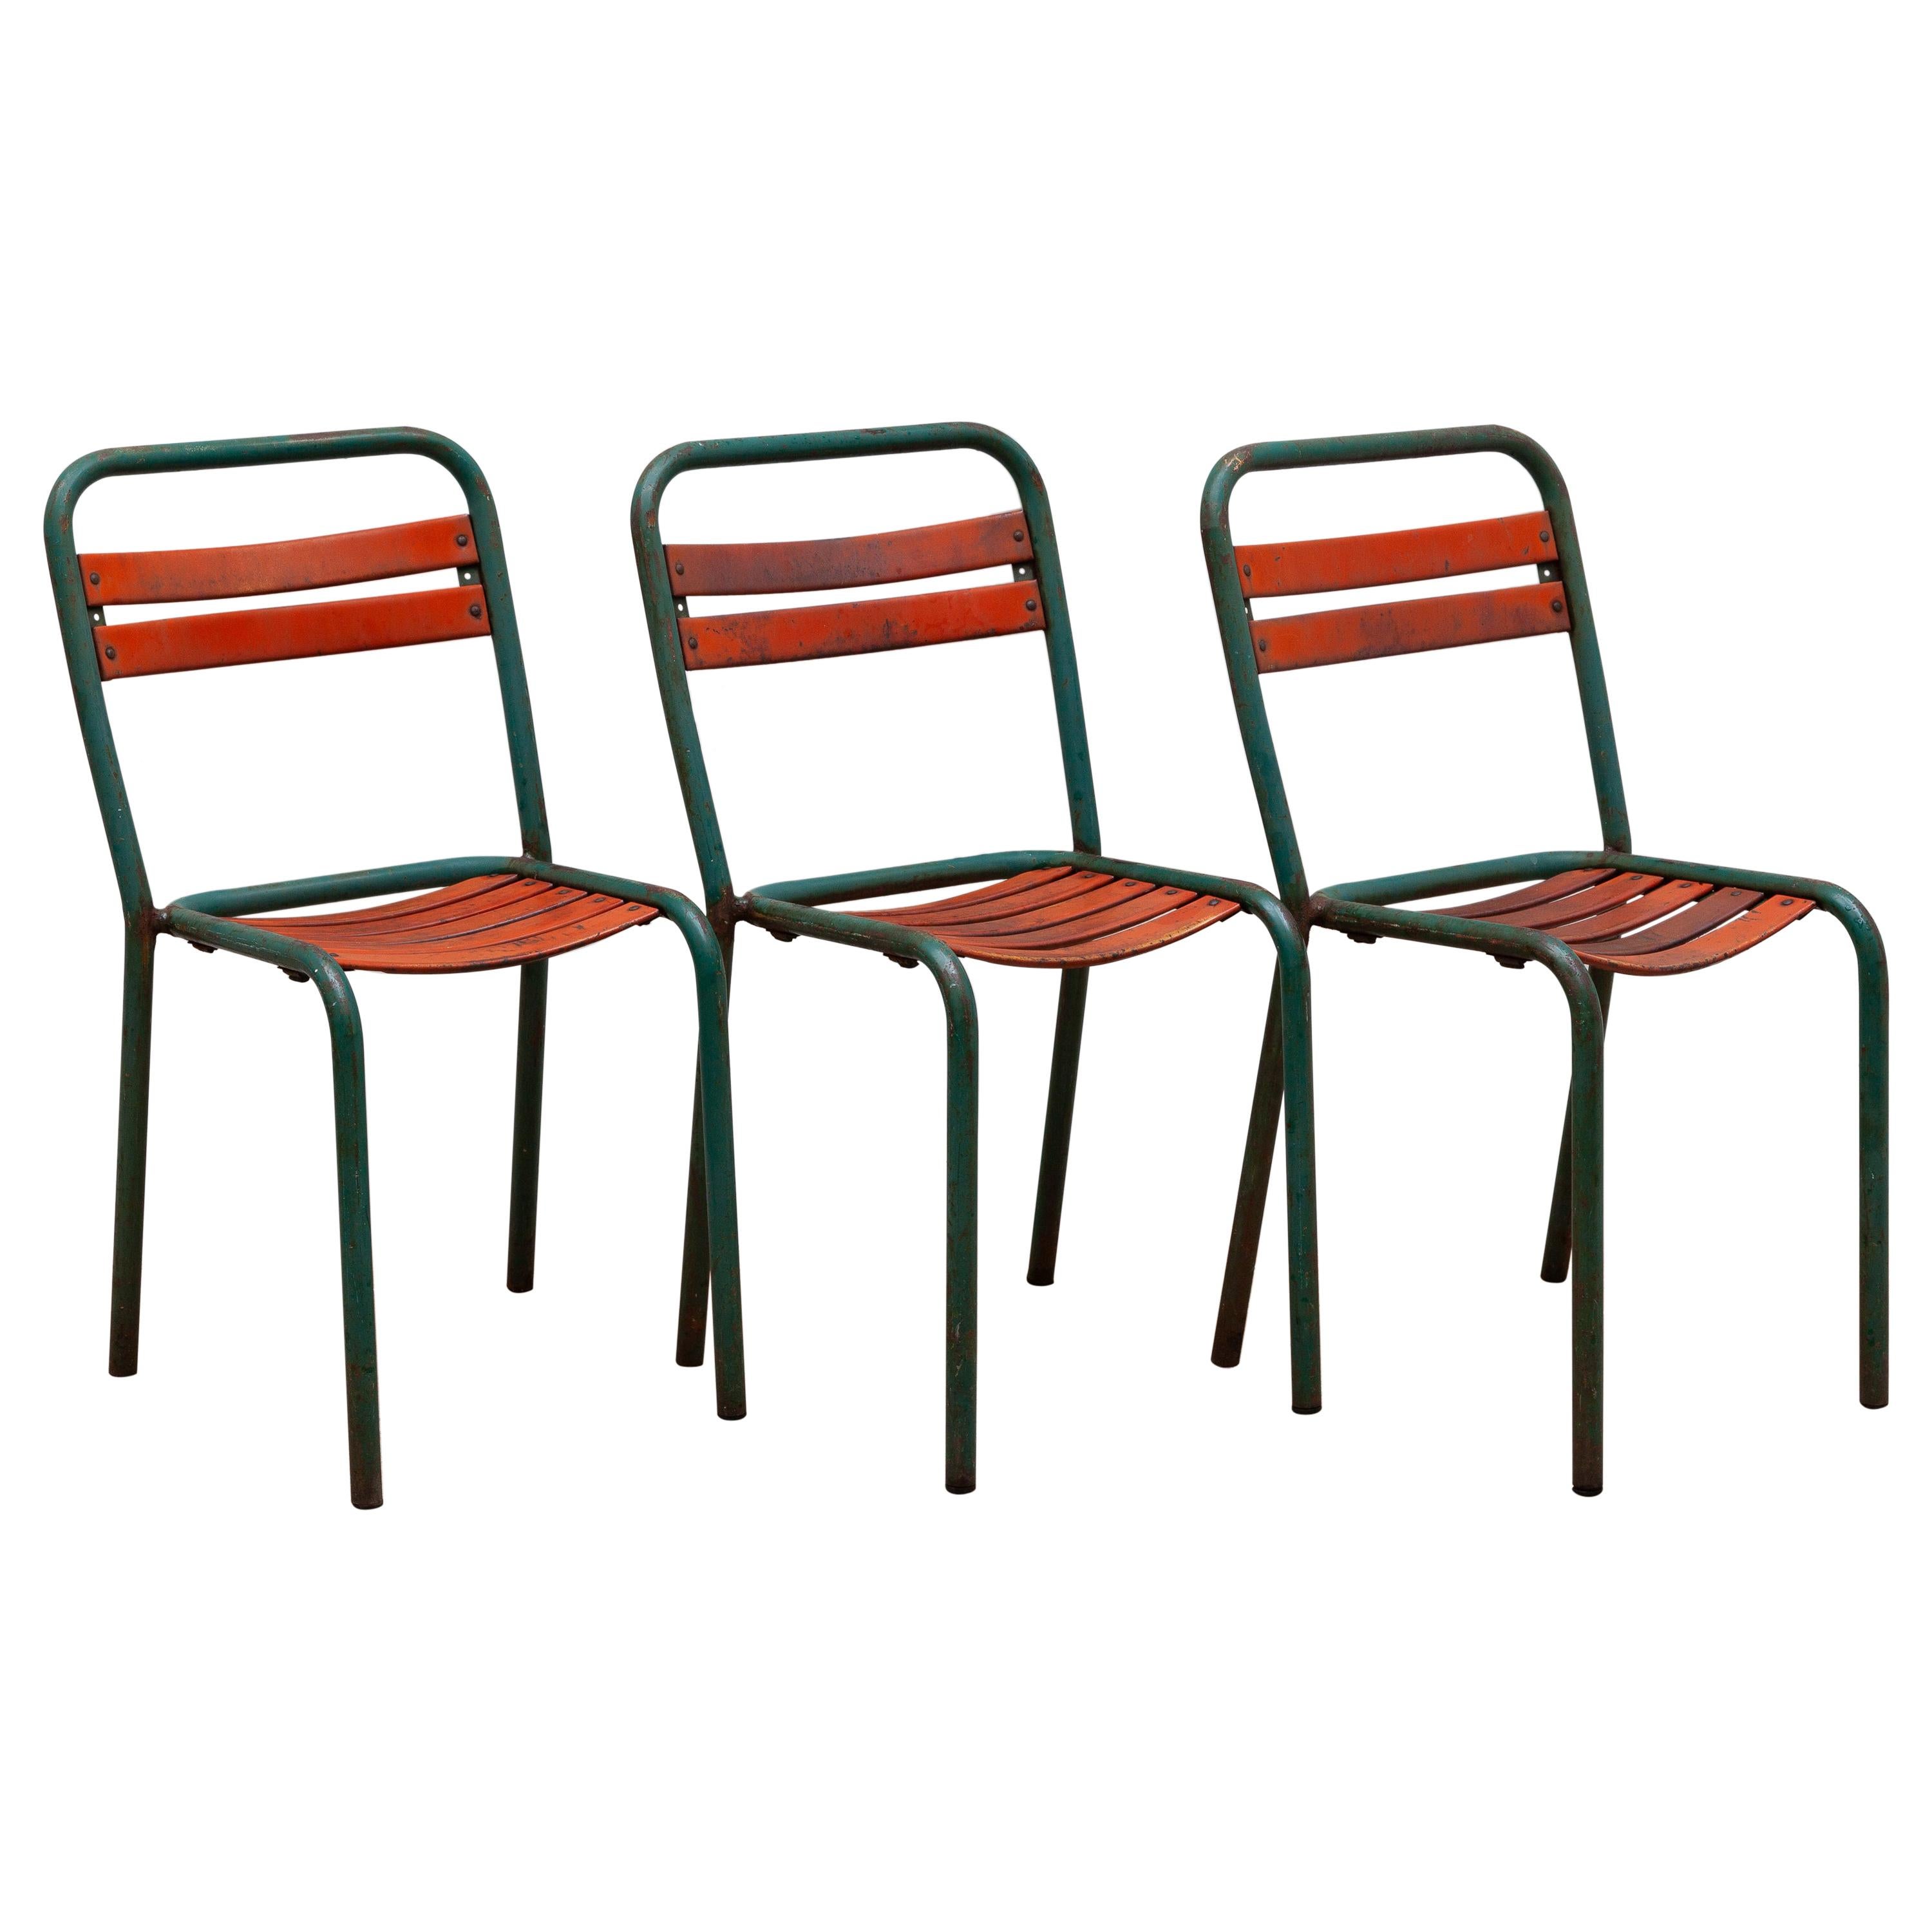 Set of Three Bistro Outdoor Chairs, France, 1930s